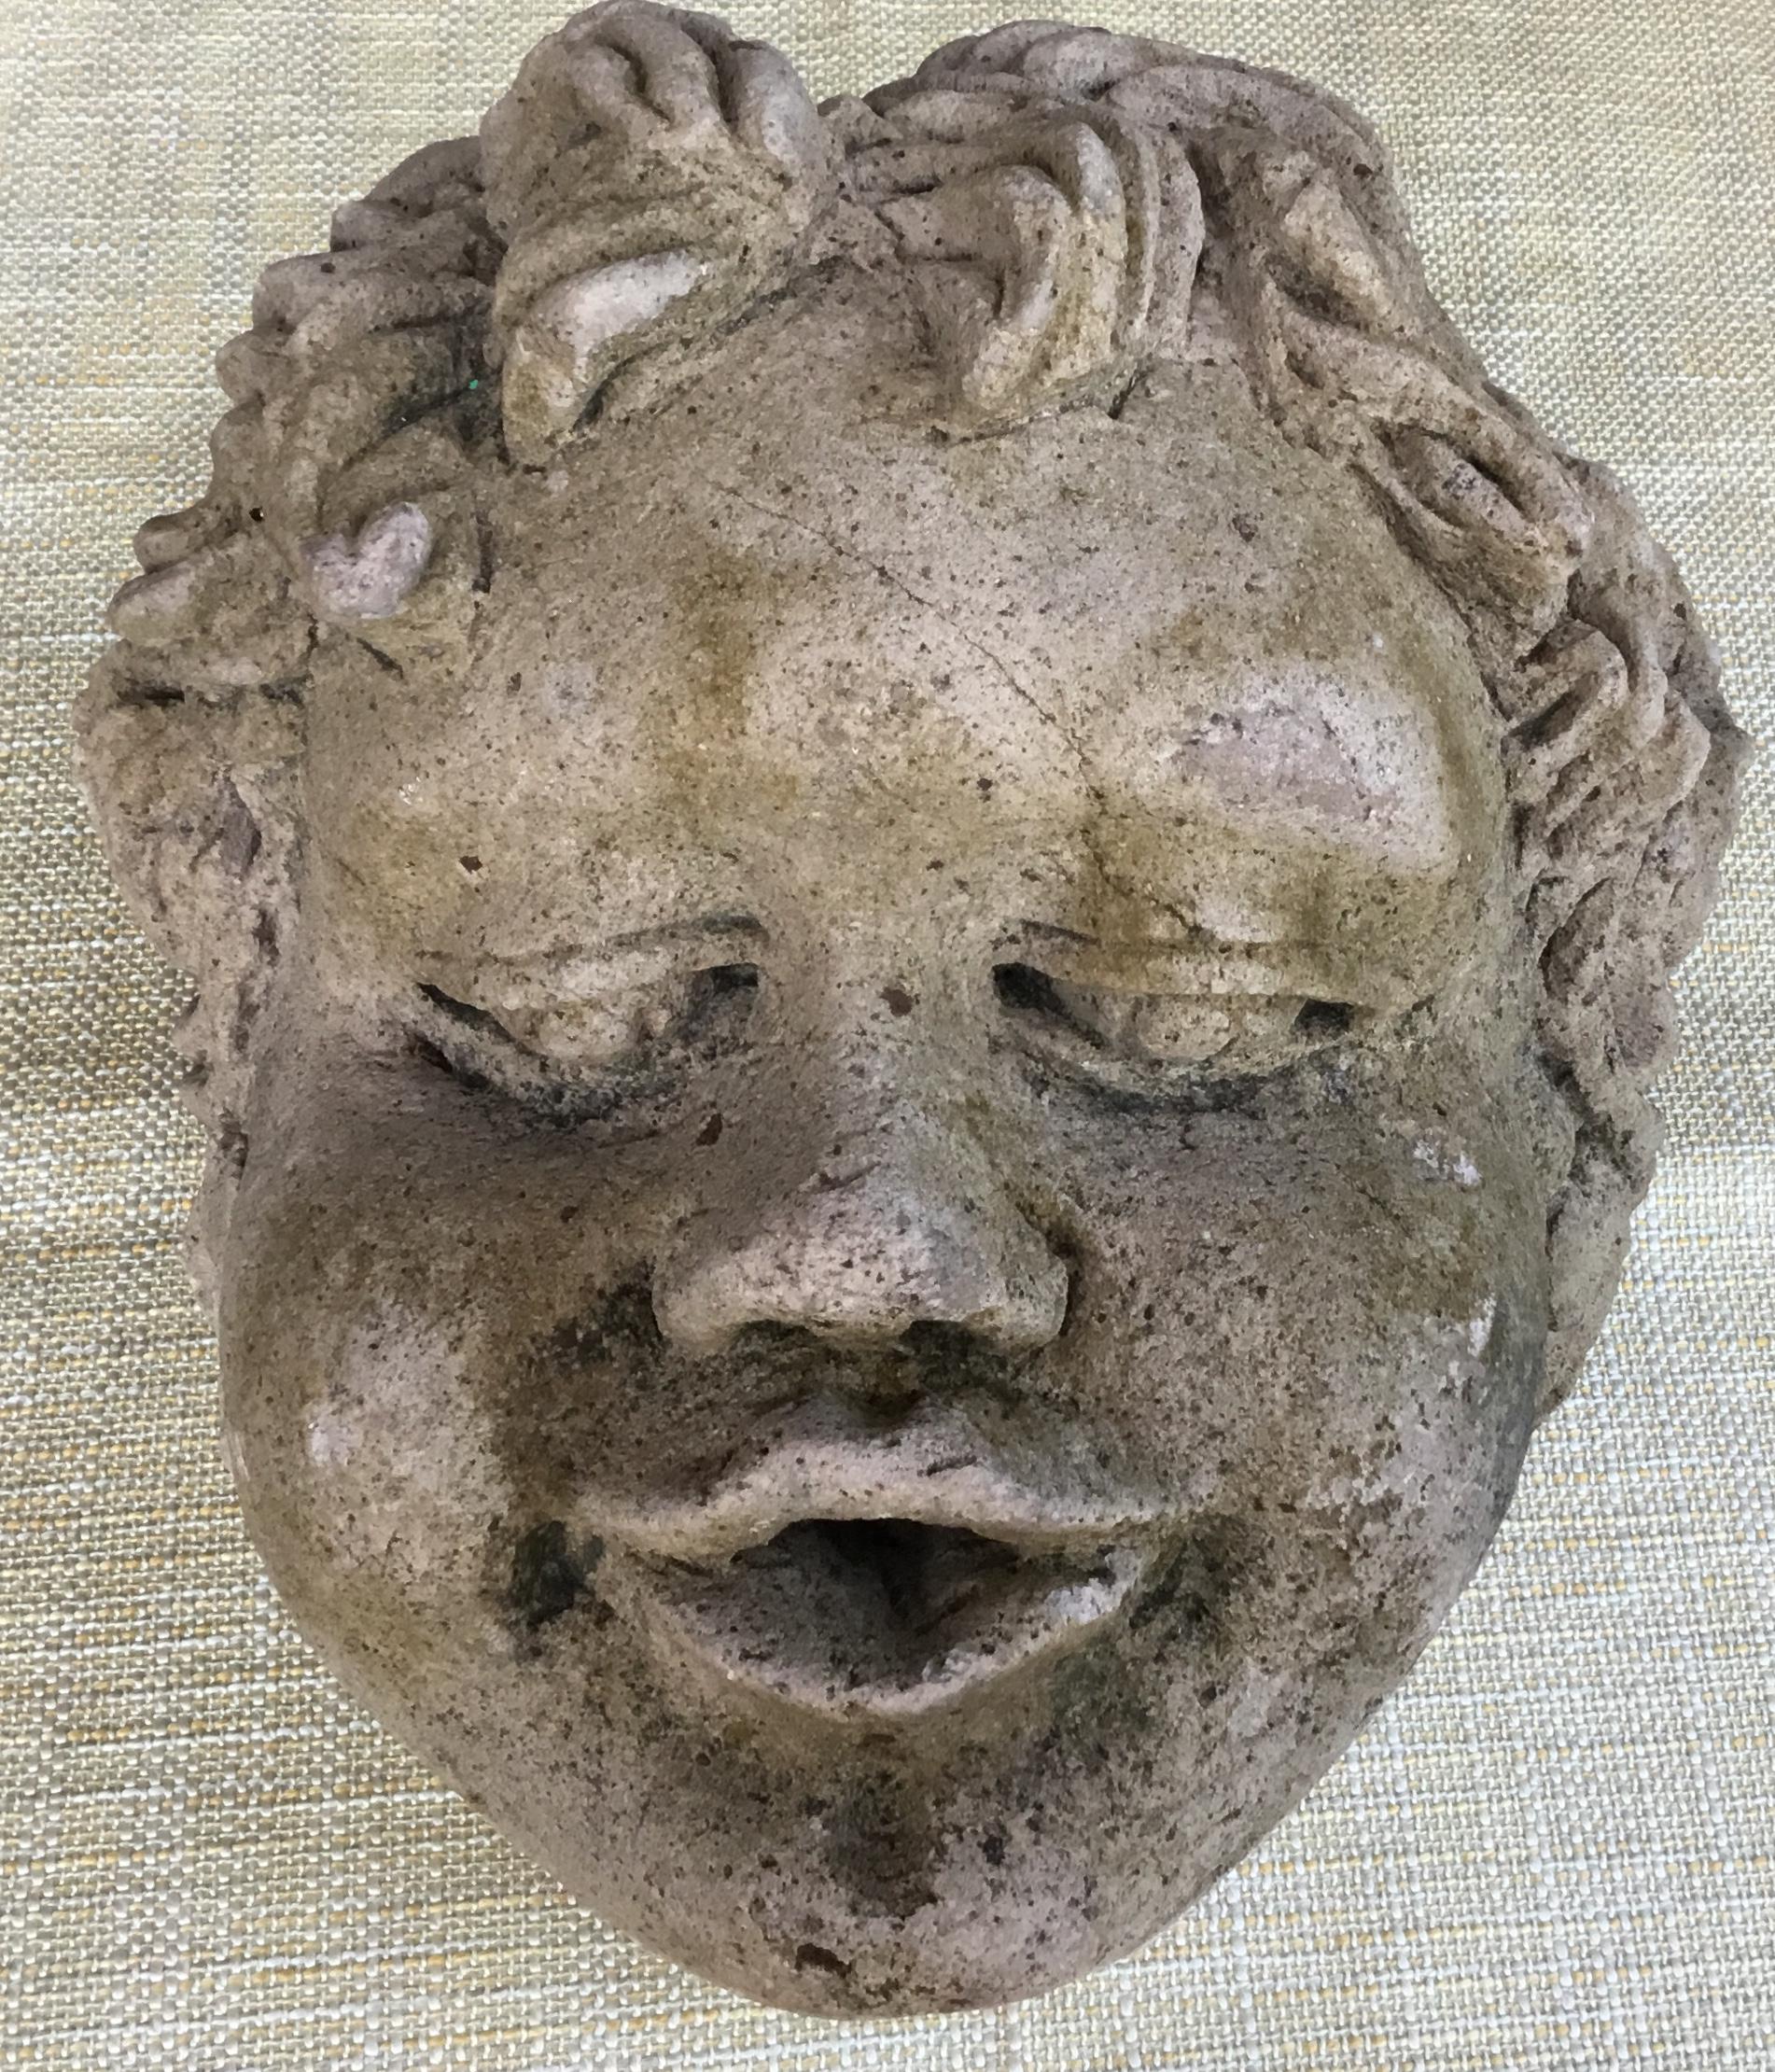 Exceptional large cherub head made of hand carved sand stone, beautiful facial expression, this piece waste used as wall-mounted fountains head, or could be use as table decoration if mounted on a
Base. Base is not included.